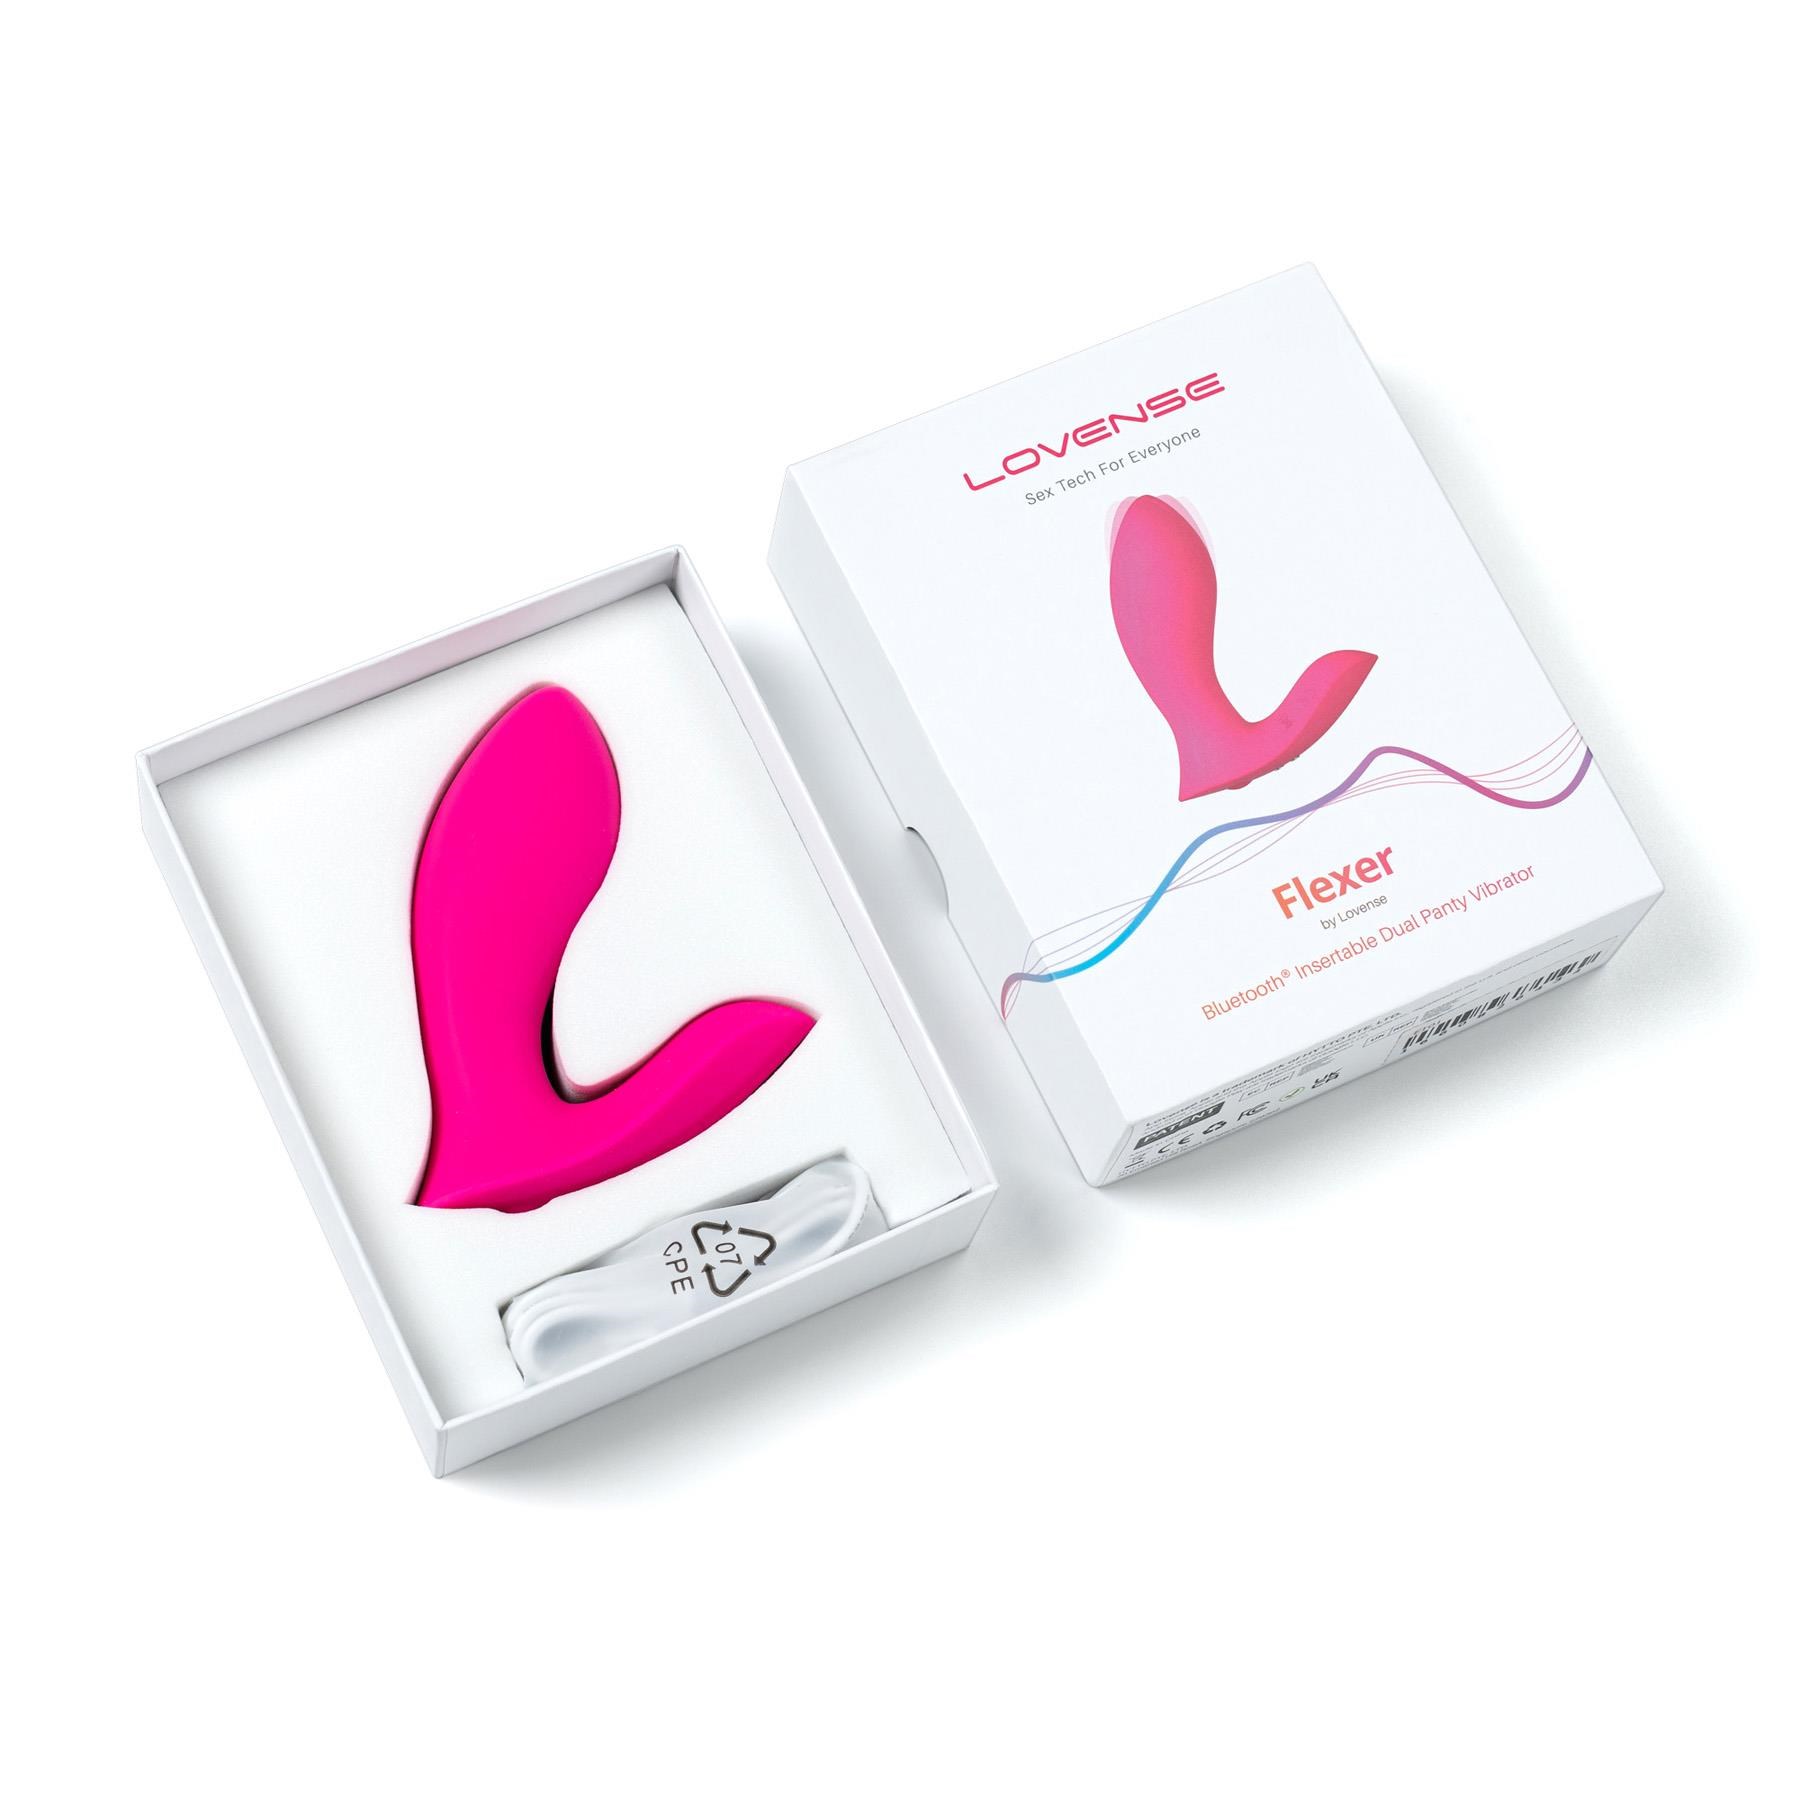 Lovense Bluetooth Flexer Come Hither Vibrator - Product and Open Box